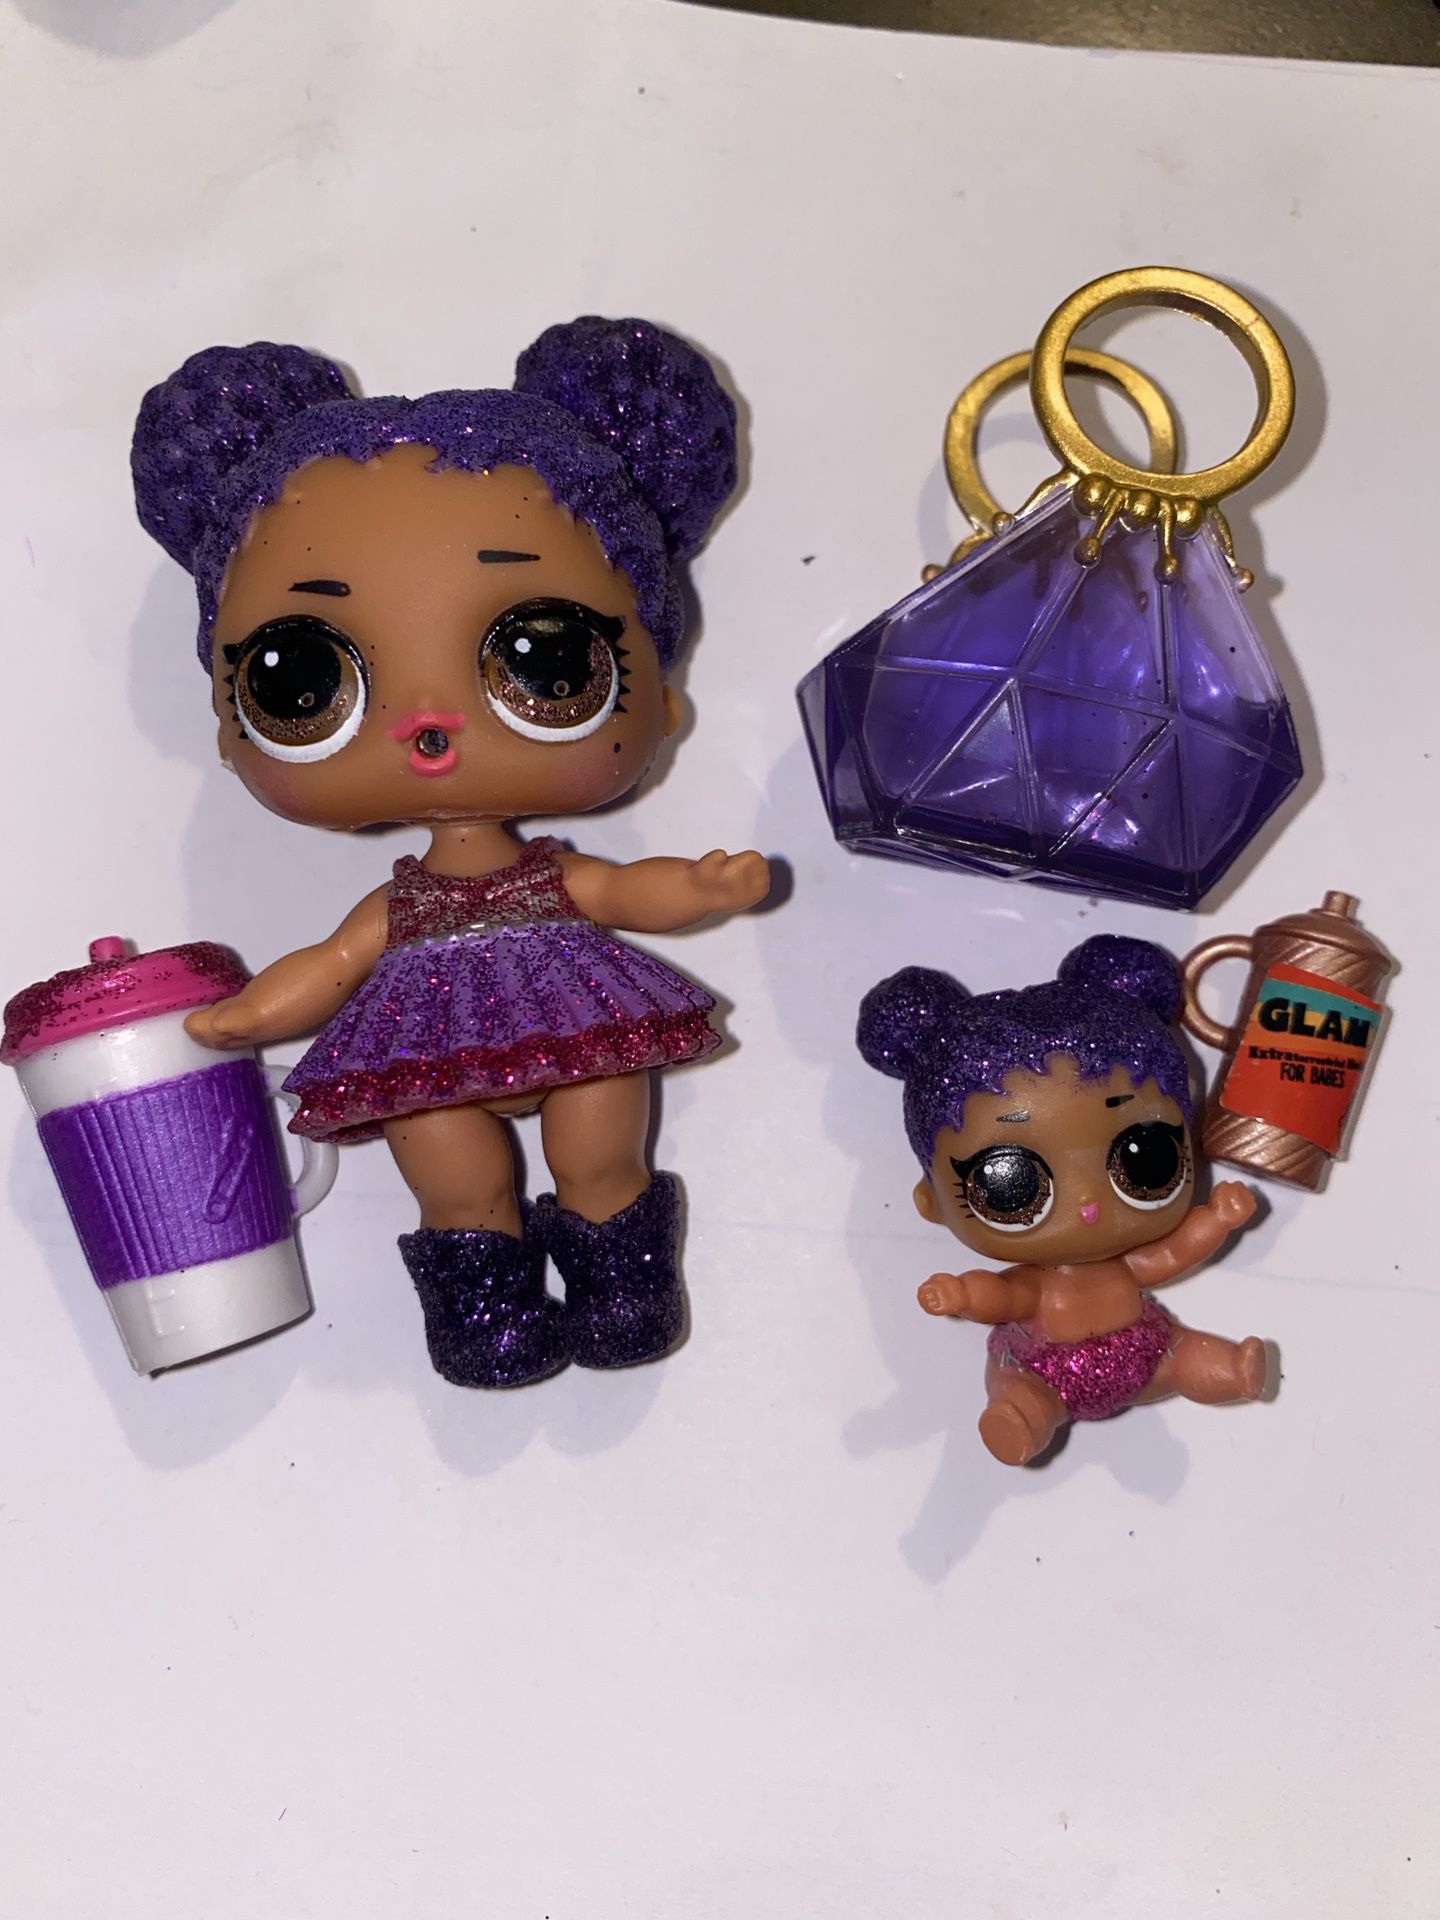 Lol Dolls “Purple Queen” and lil sis